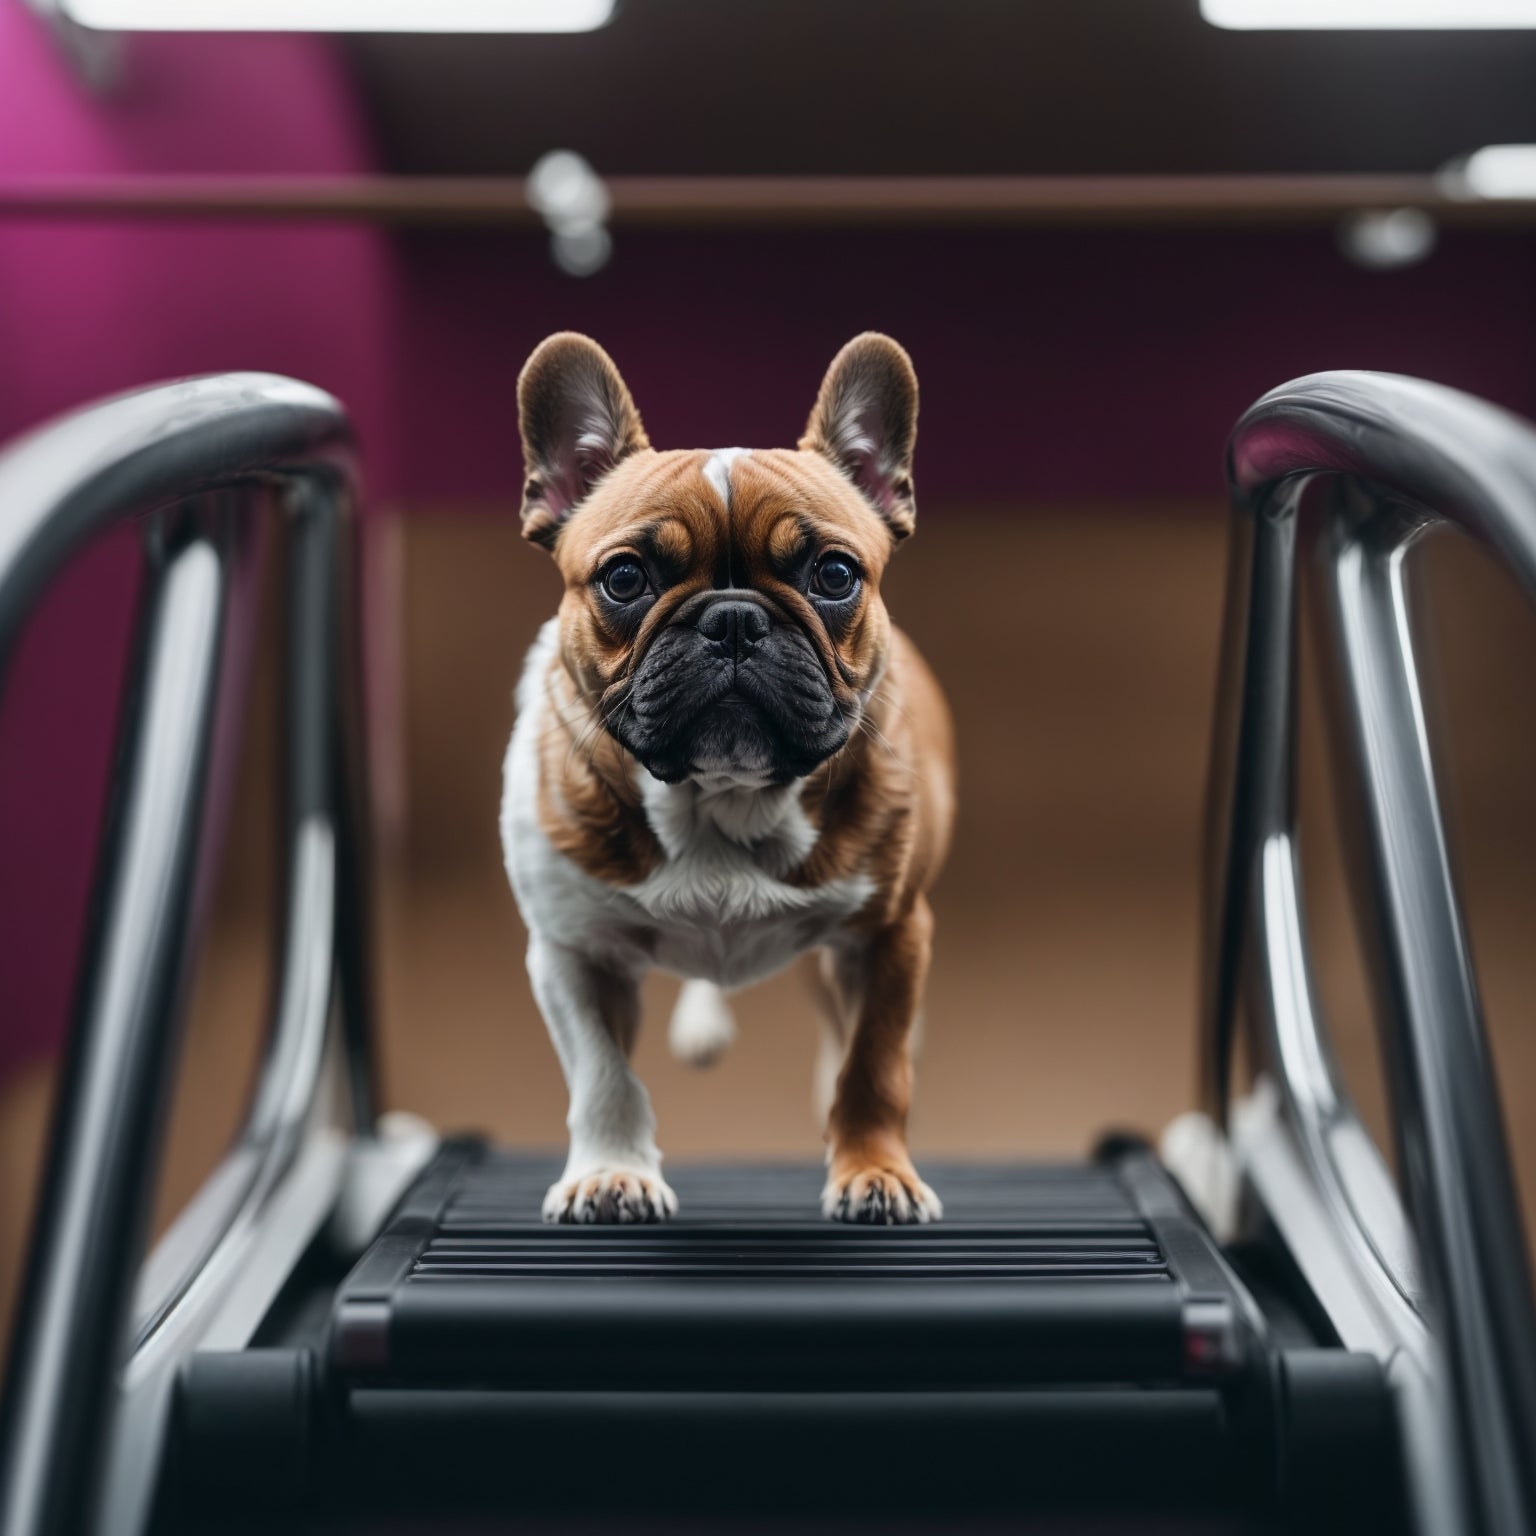 How Can I Help My Dog Lose Weight?